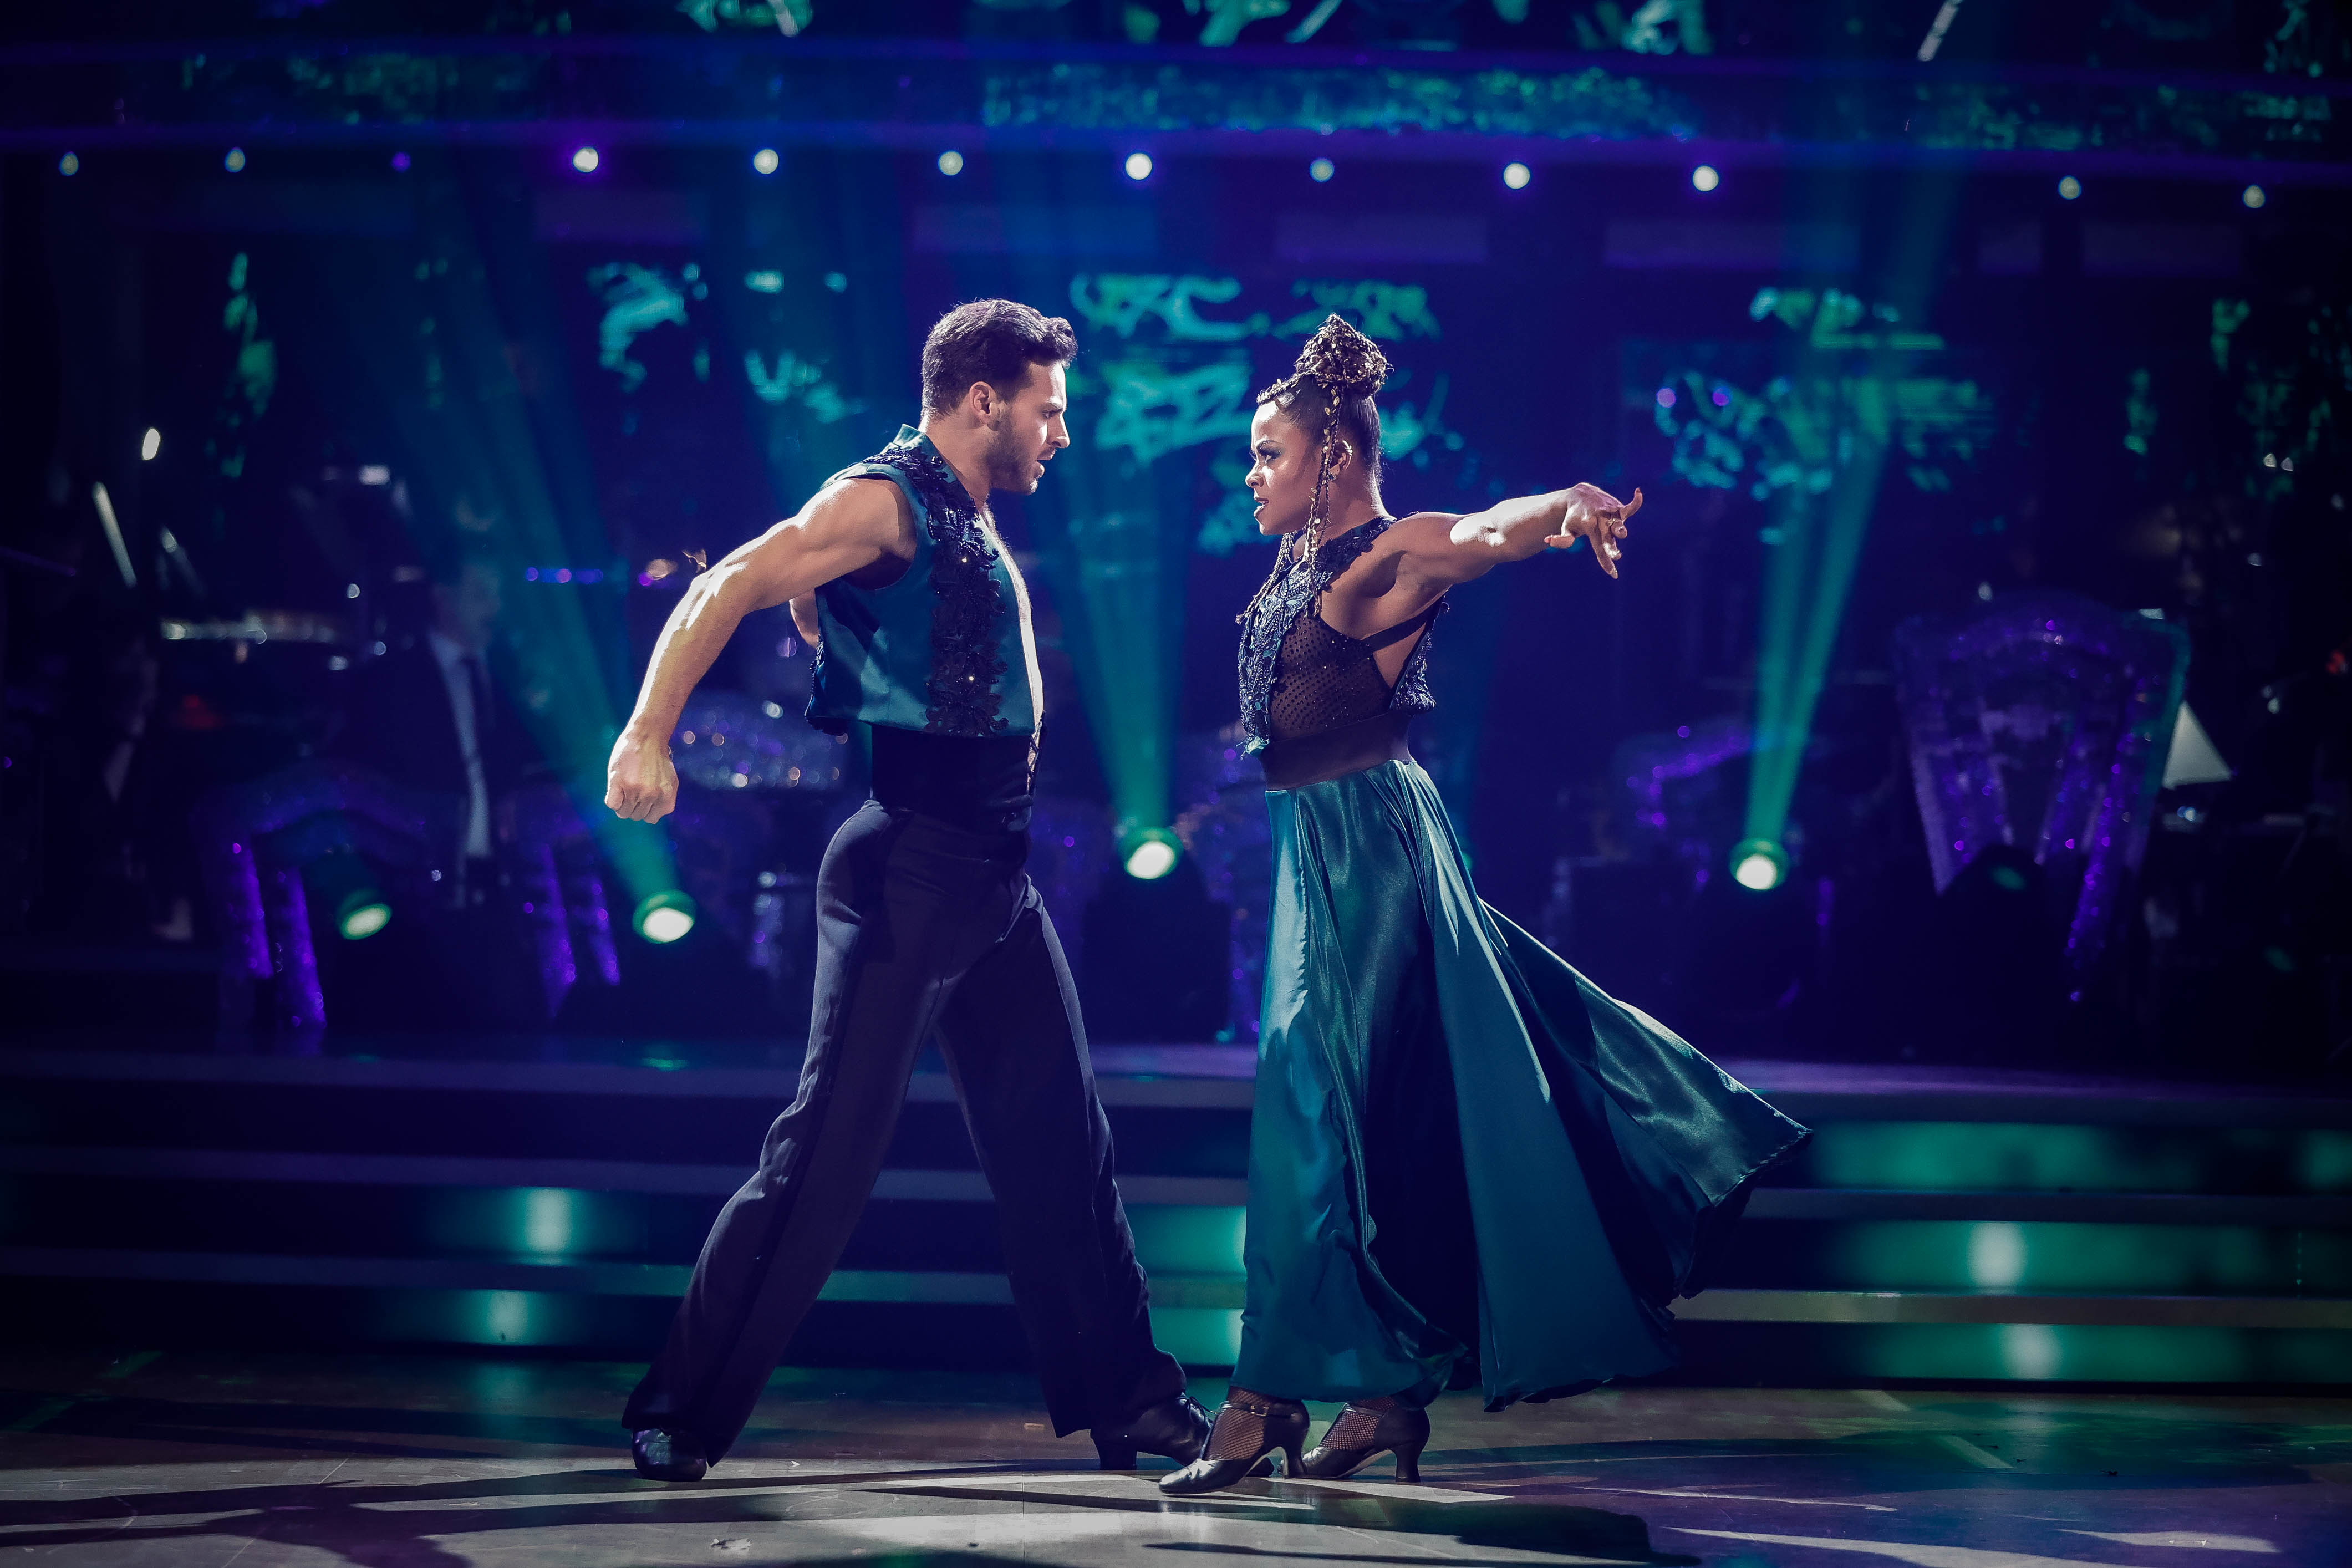 What are the Strictly Come Dancing songs and dances?